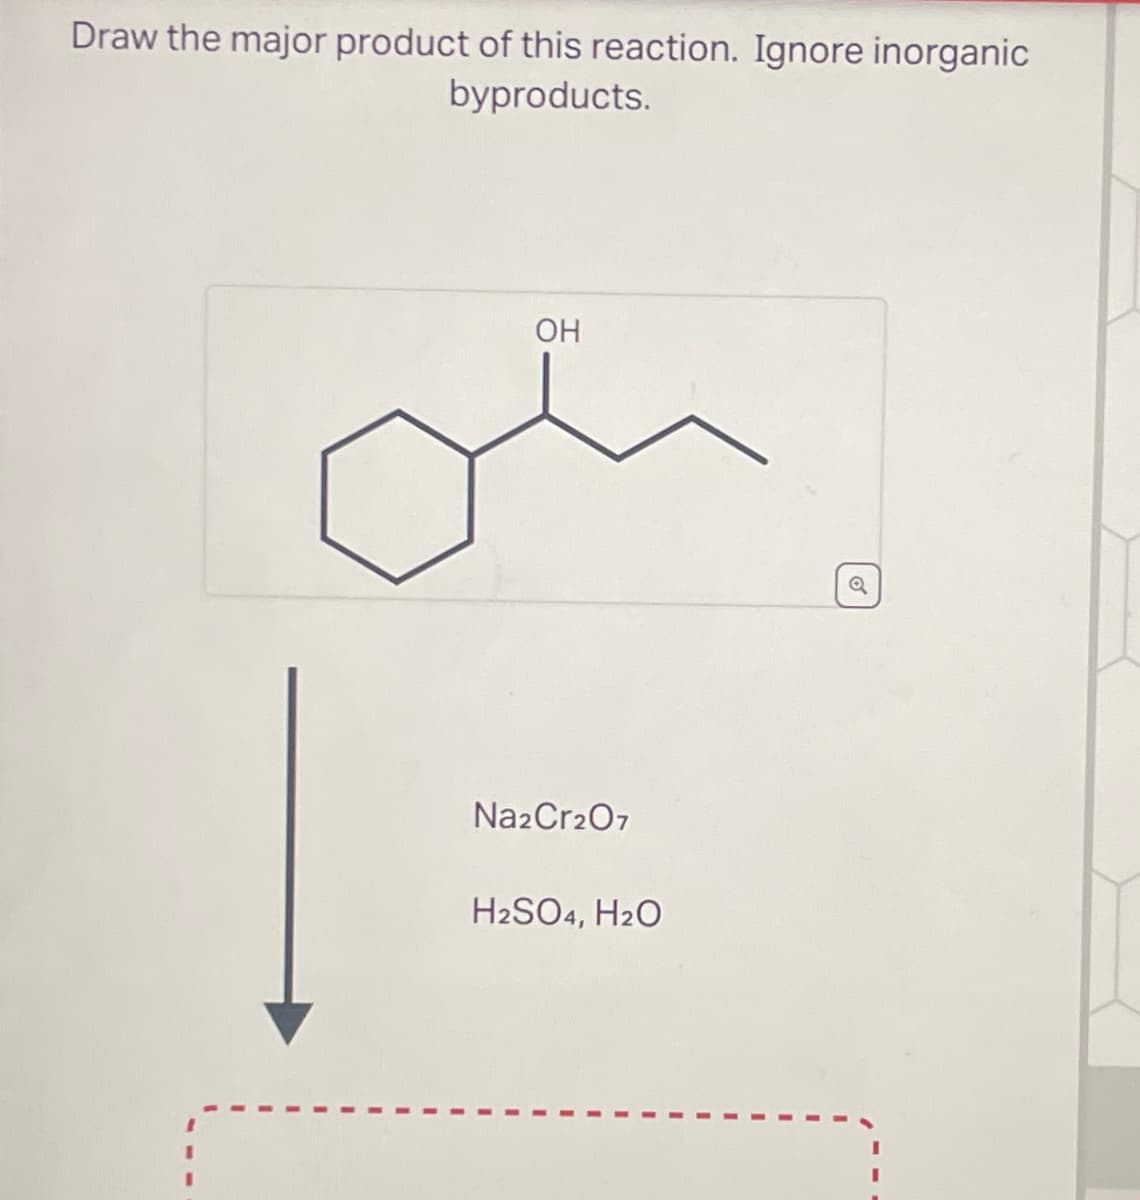 Draw the major product of this reaction. Ignore inorganic
byproducts.
OH
Na2Cr2O7
H2SO4, H2O
a